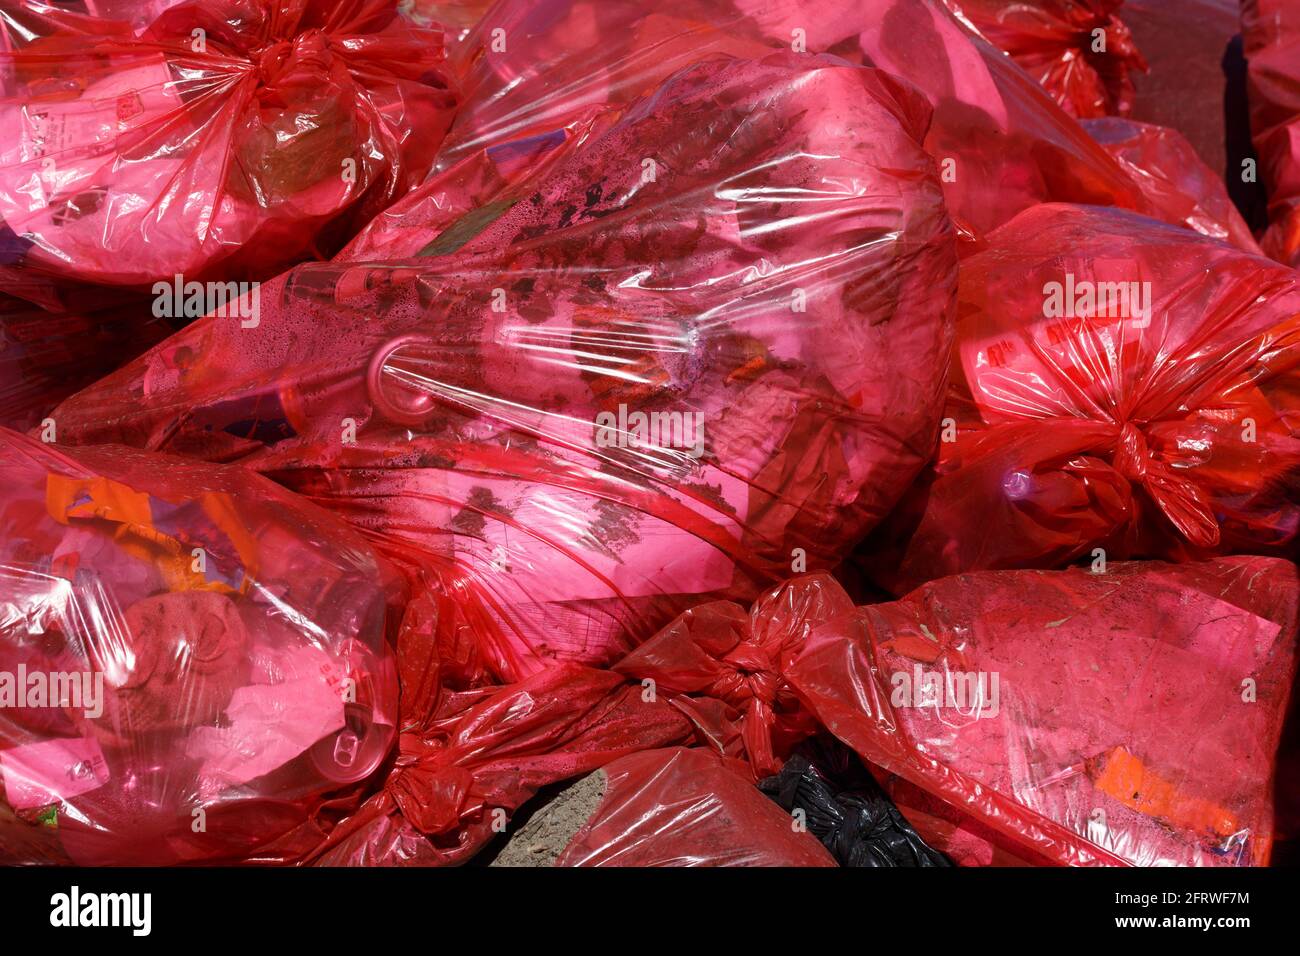 full frame background of red plastic trash bags with generic